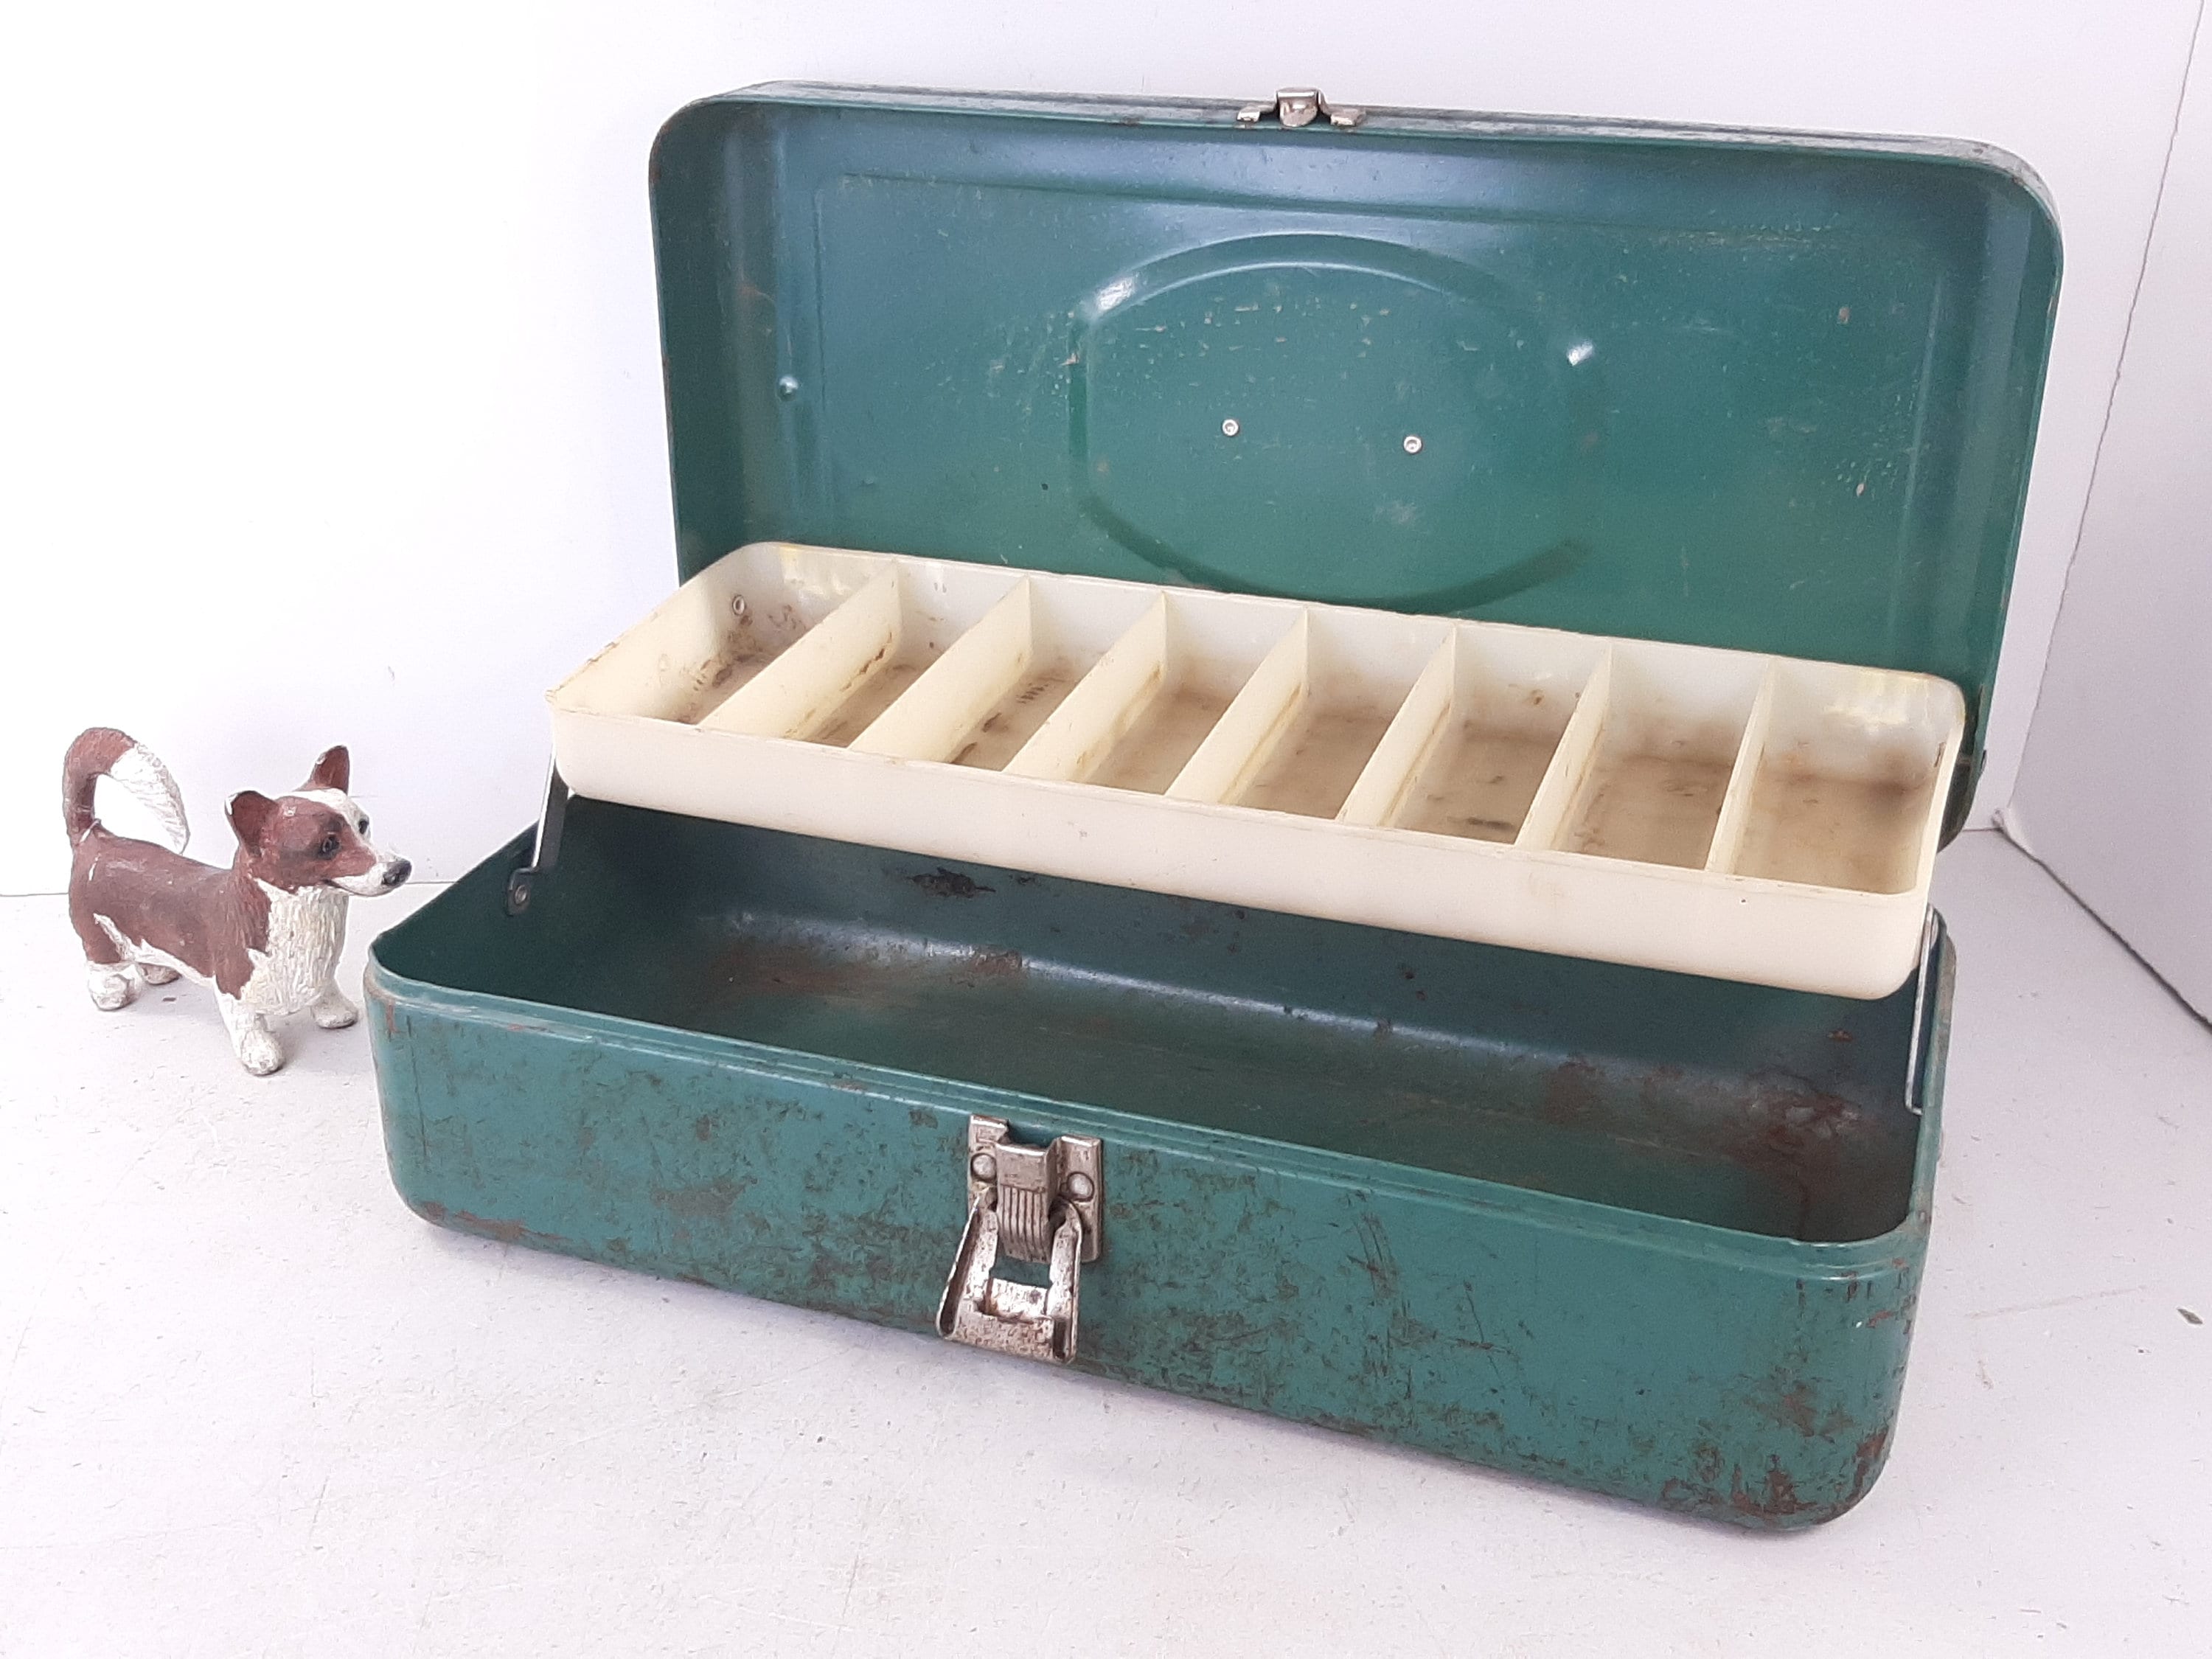 Sold at Auction: A metal tackle box, Reel 4 1/4 in. (10.8 cm.), Box 6 1/2 x  14 x 6 in. (16.5 x 35.6 x 15.2 cm.)